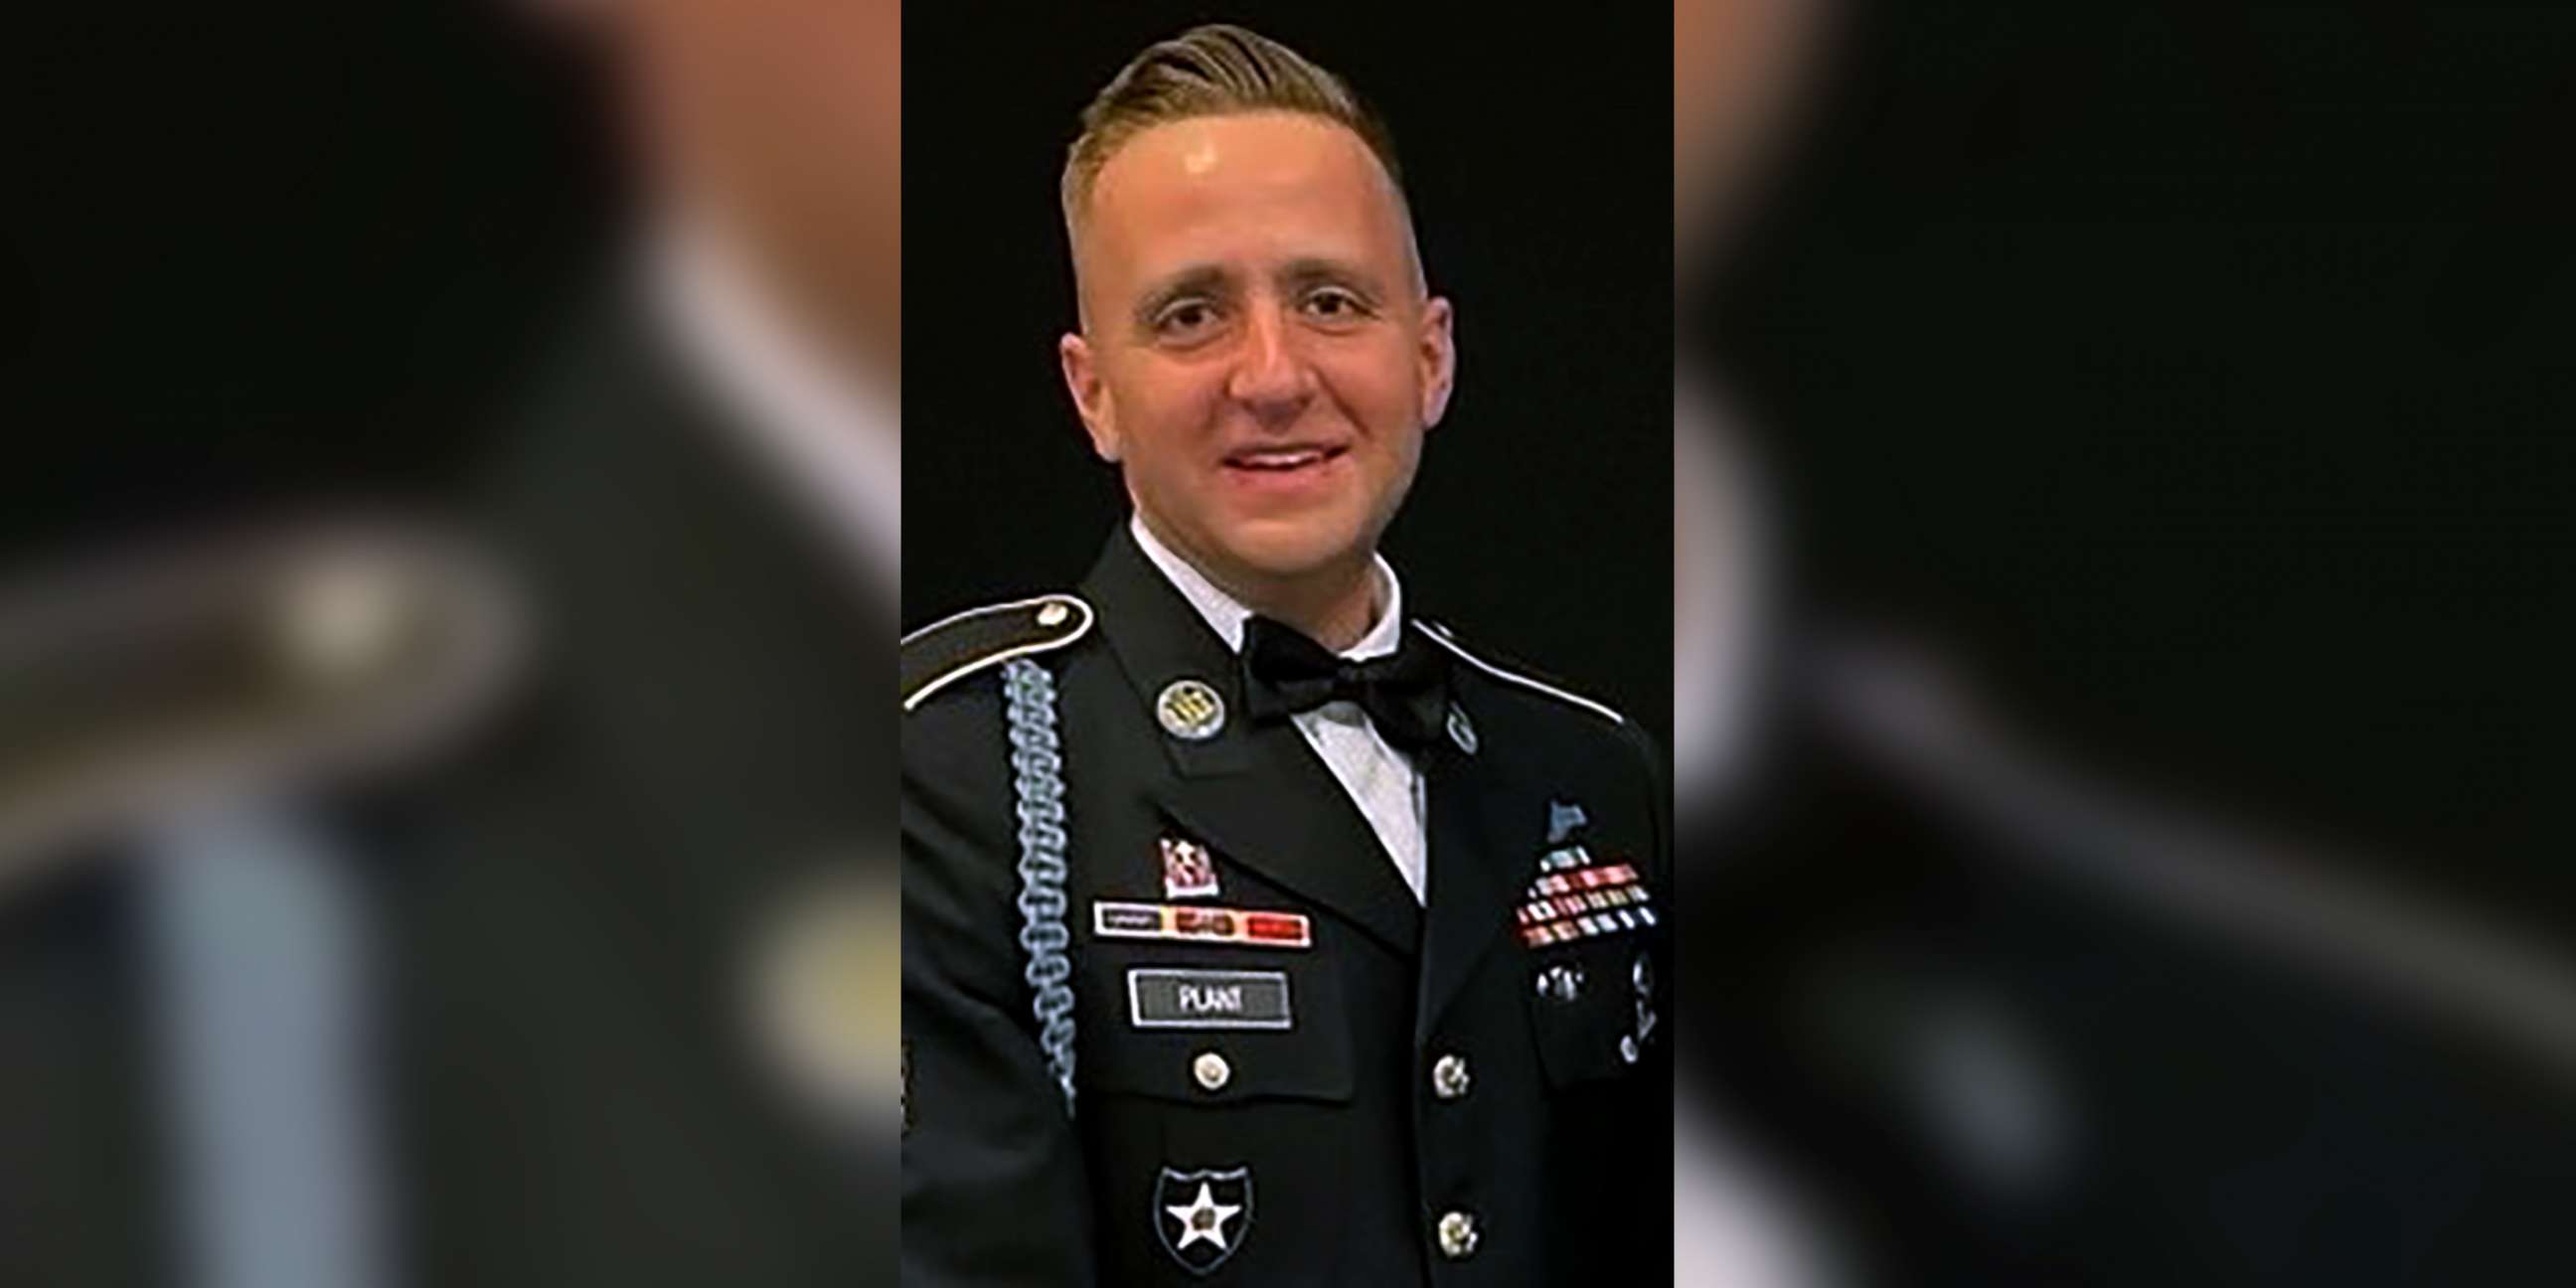 PHOTO: Staff Sgt. Seth Michael Plant, 30, was killed in a bear attack in Alaska on May 10, officials said.